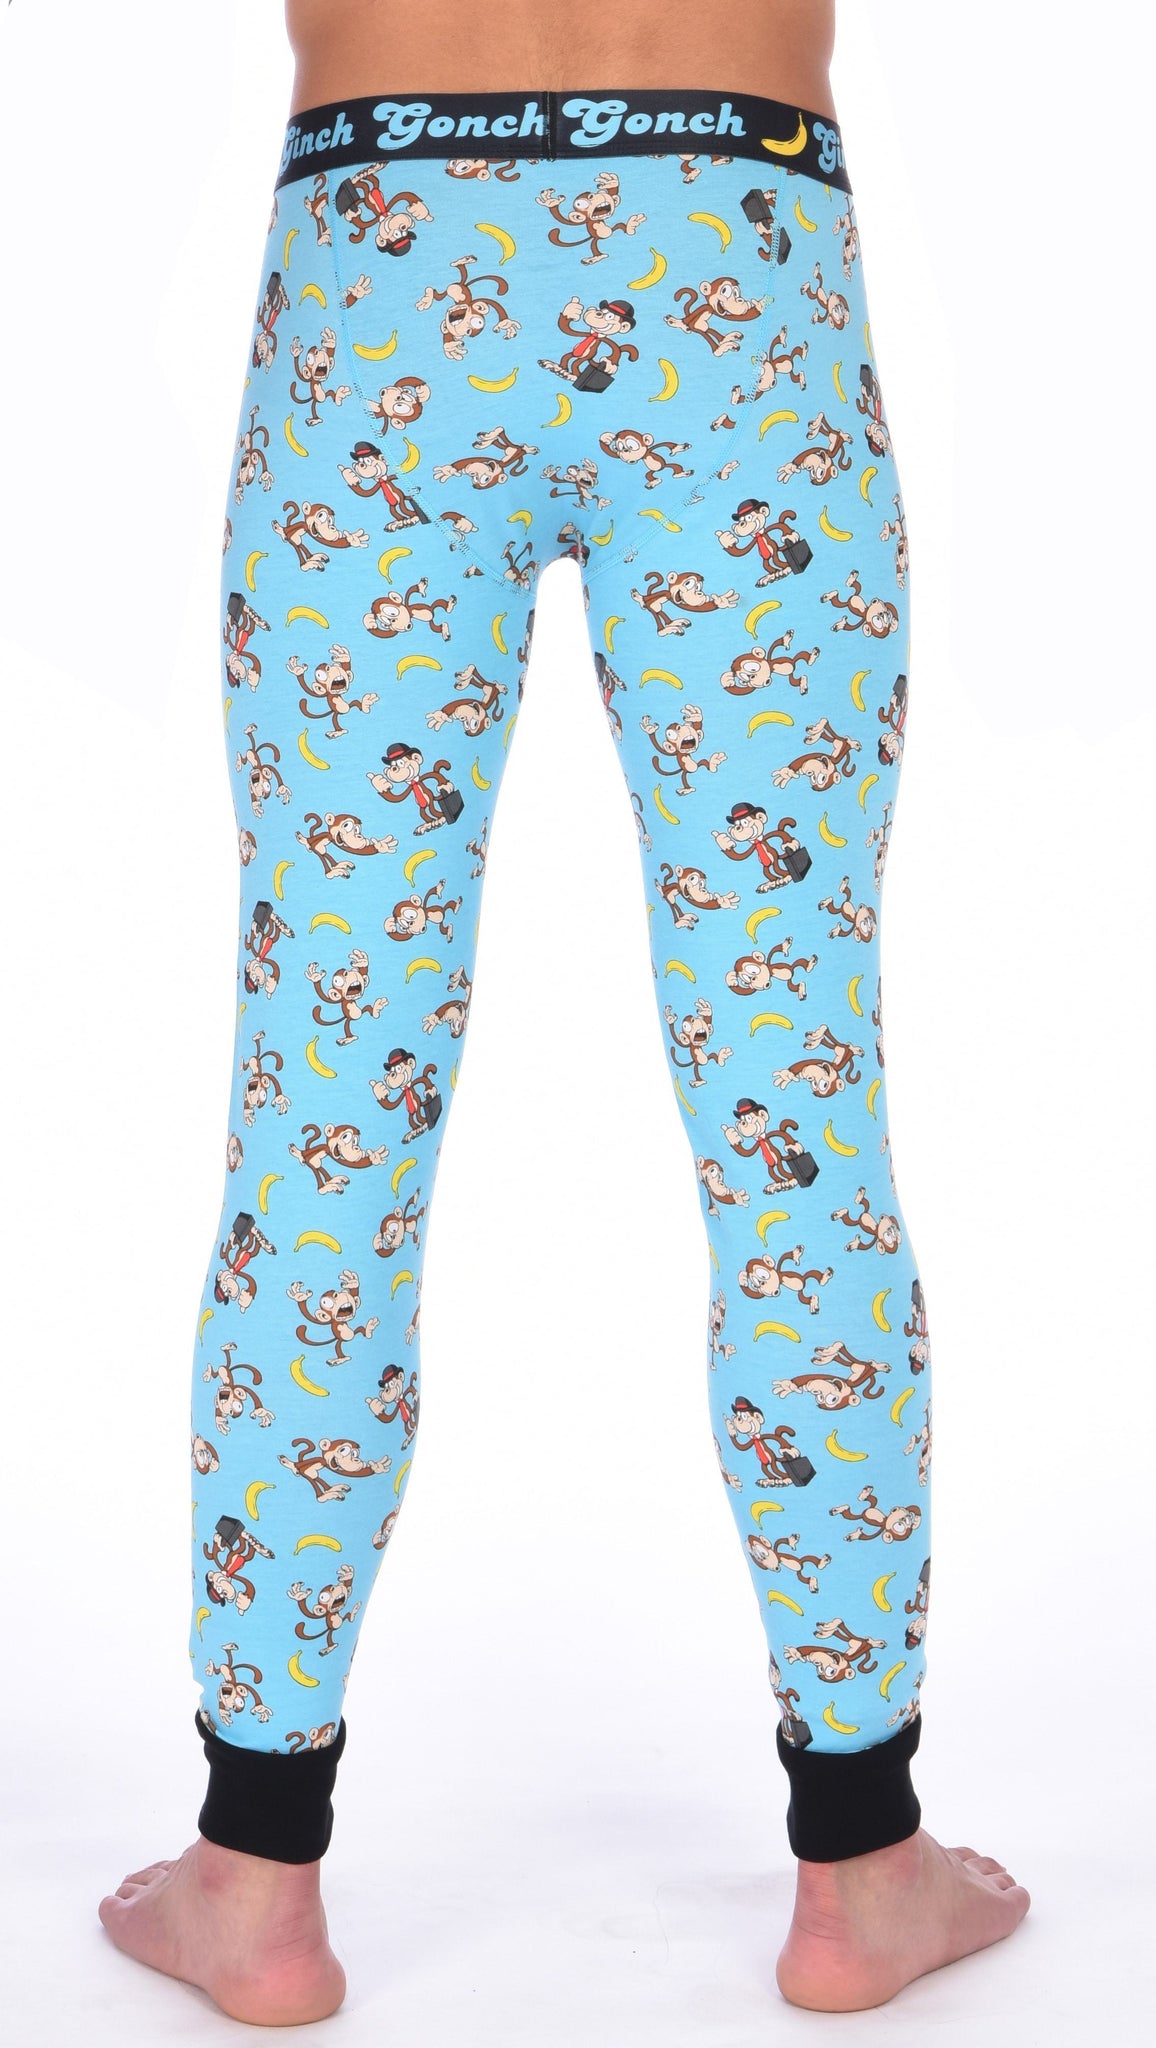 Ginch Gonch Monkey Business Men's Leggings Long Johns Underwear with blue background, monkeys, and bananas. Black trim and printed waistband with Ginch Gonch and bananas. Back.